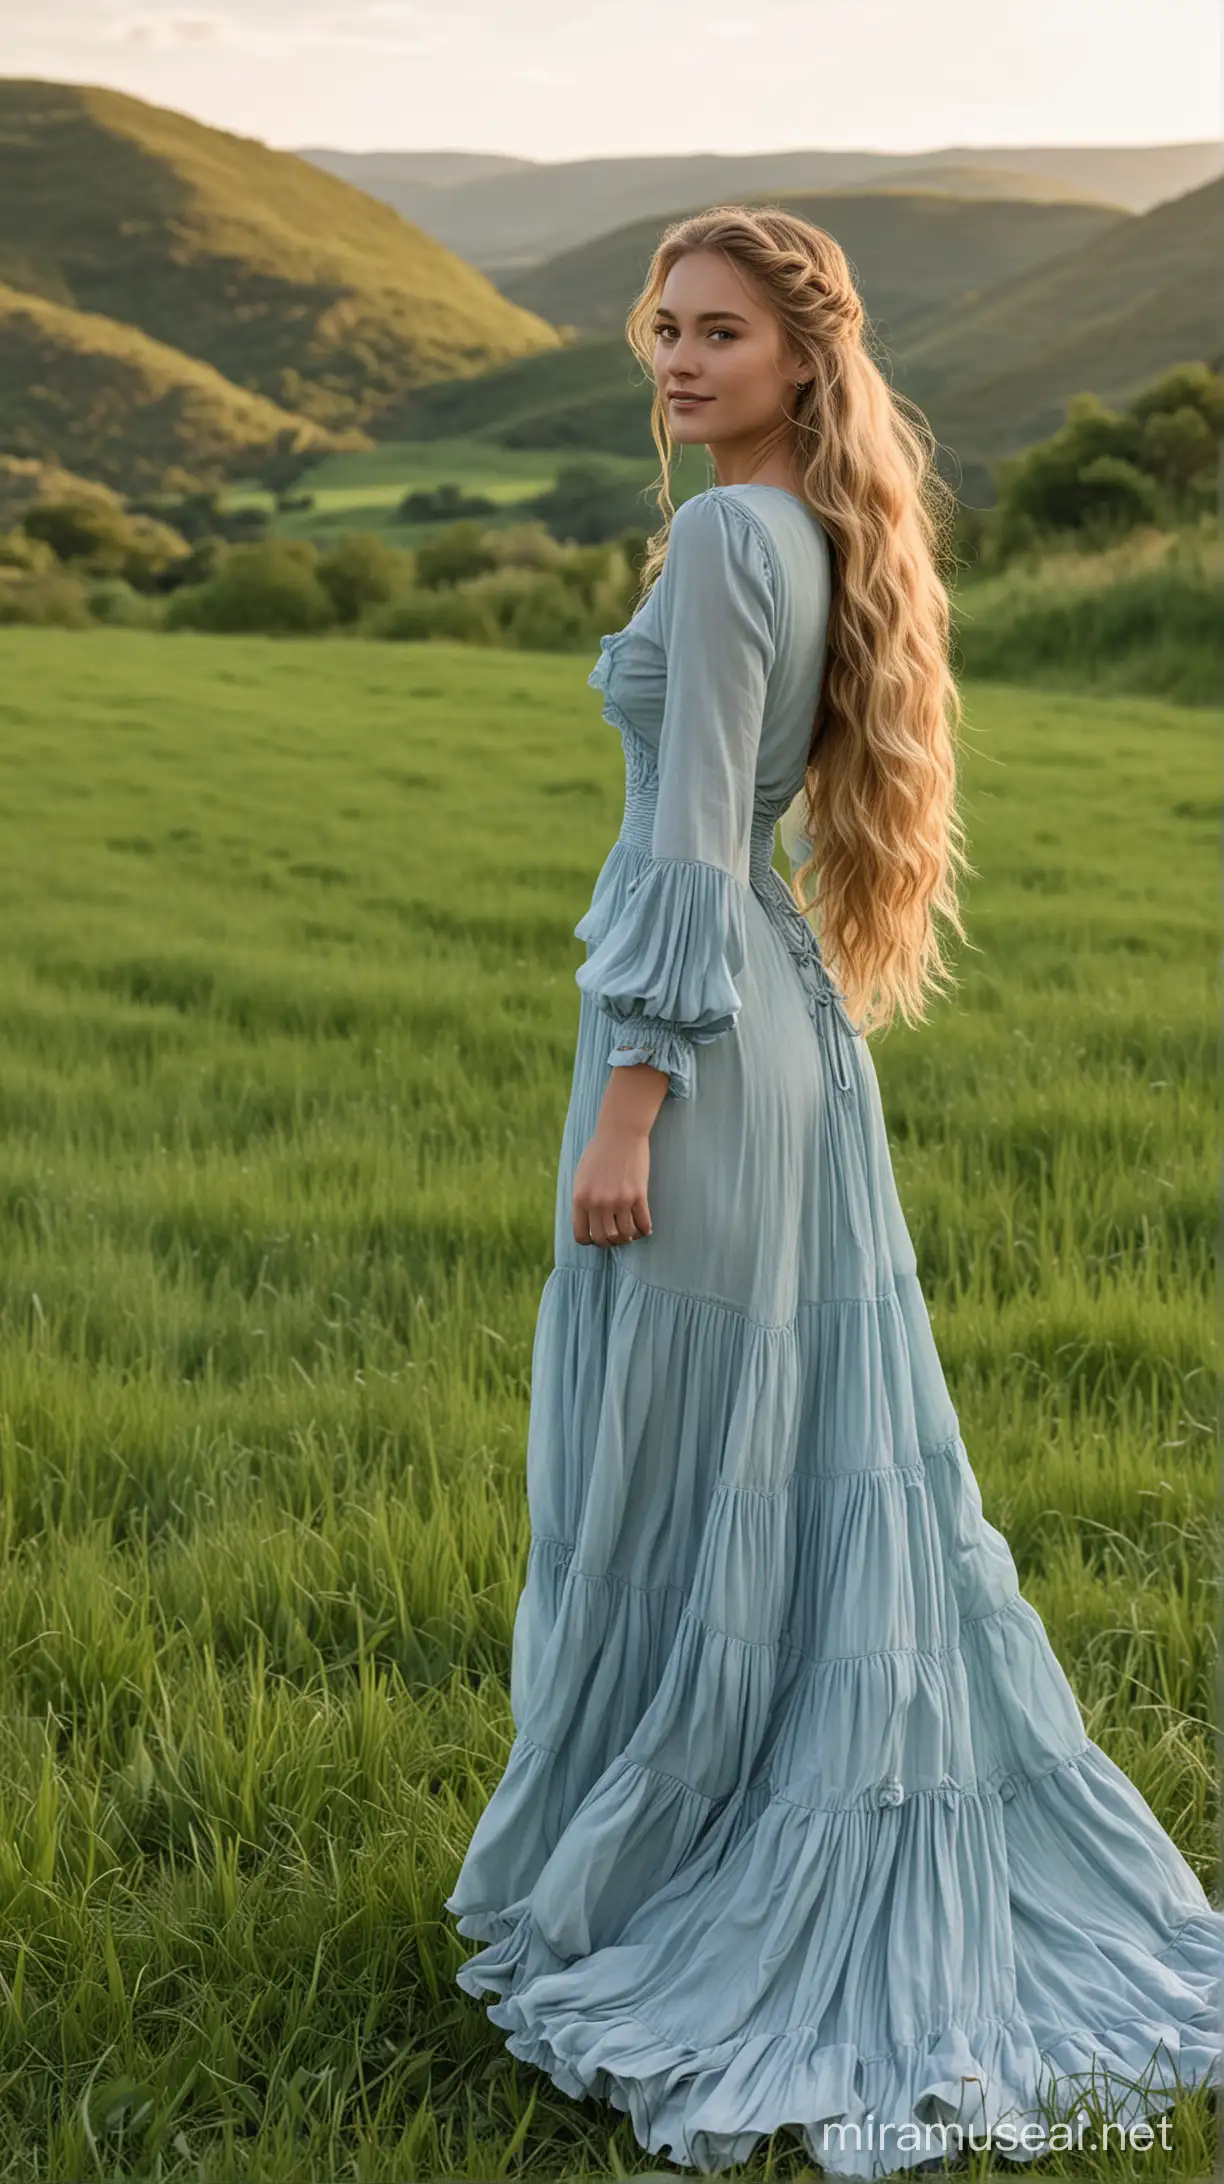 Young Woman with Golden Hair in Blue Gown Standing in Lush Green Field